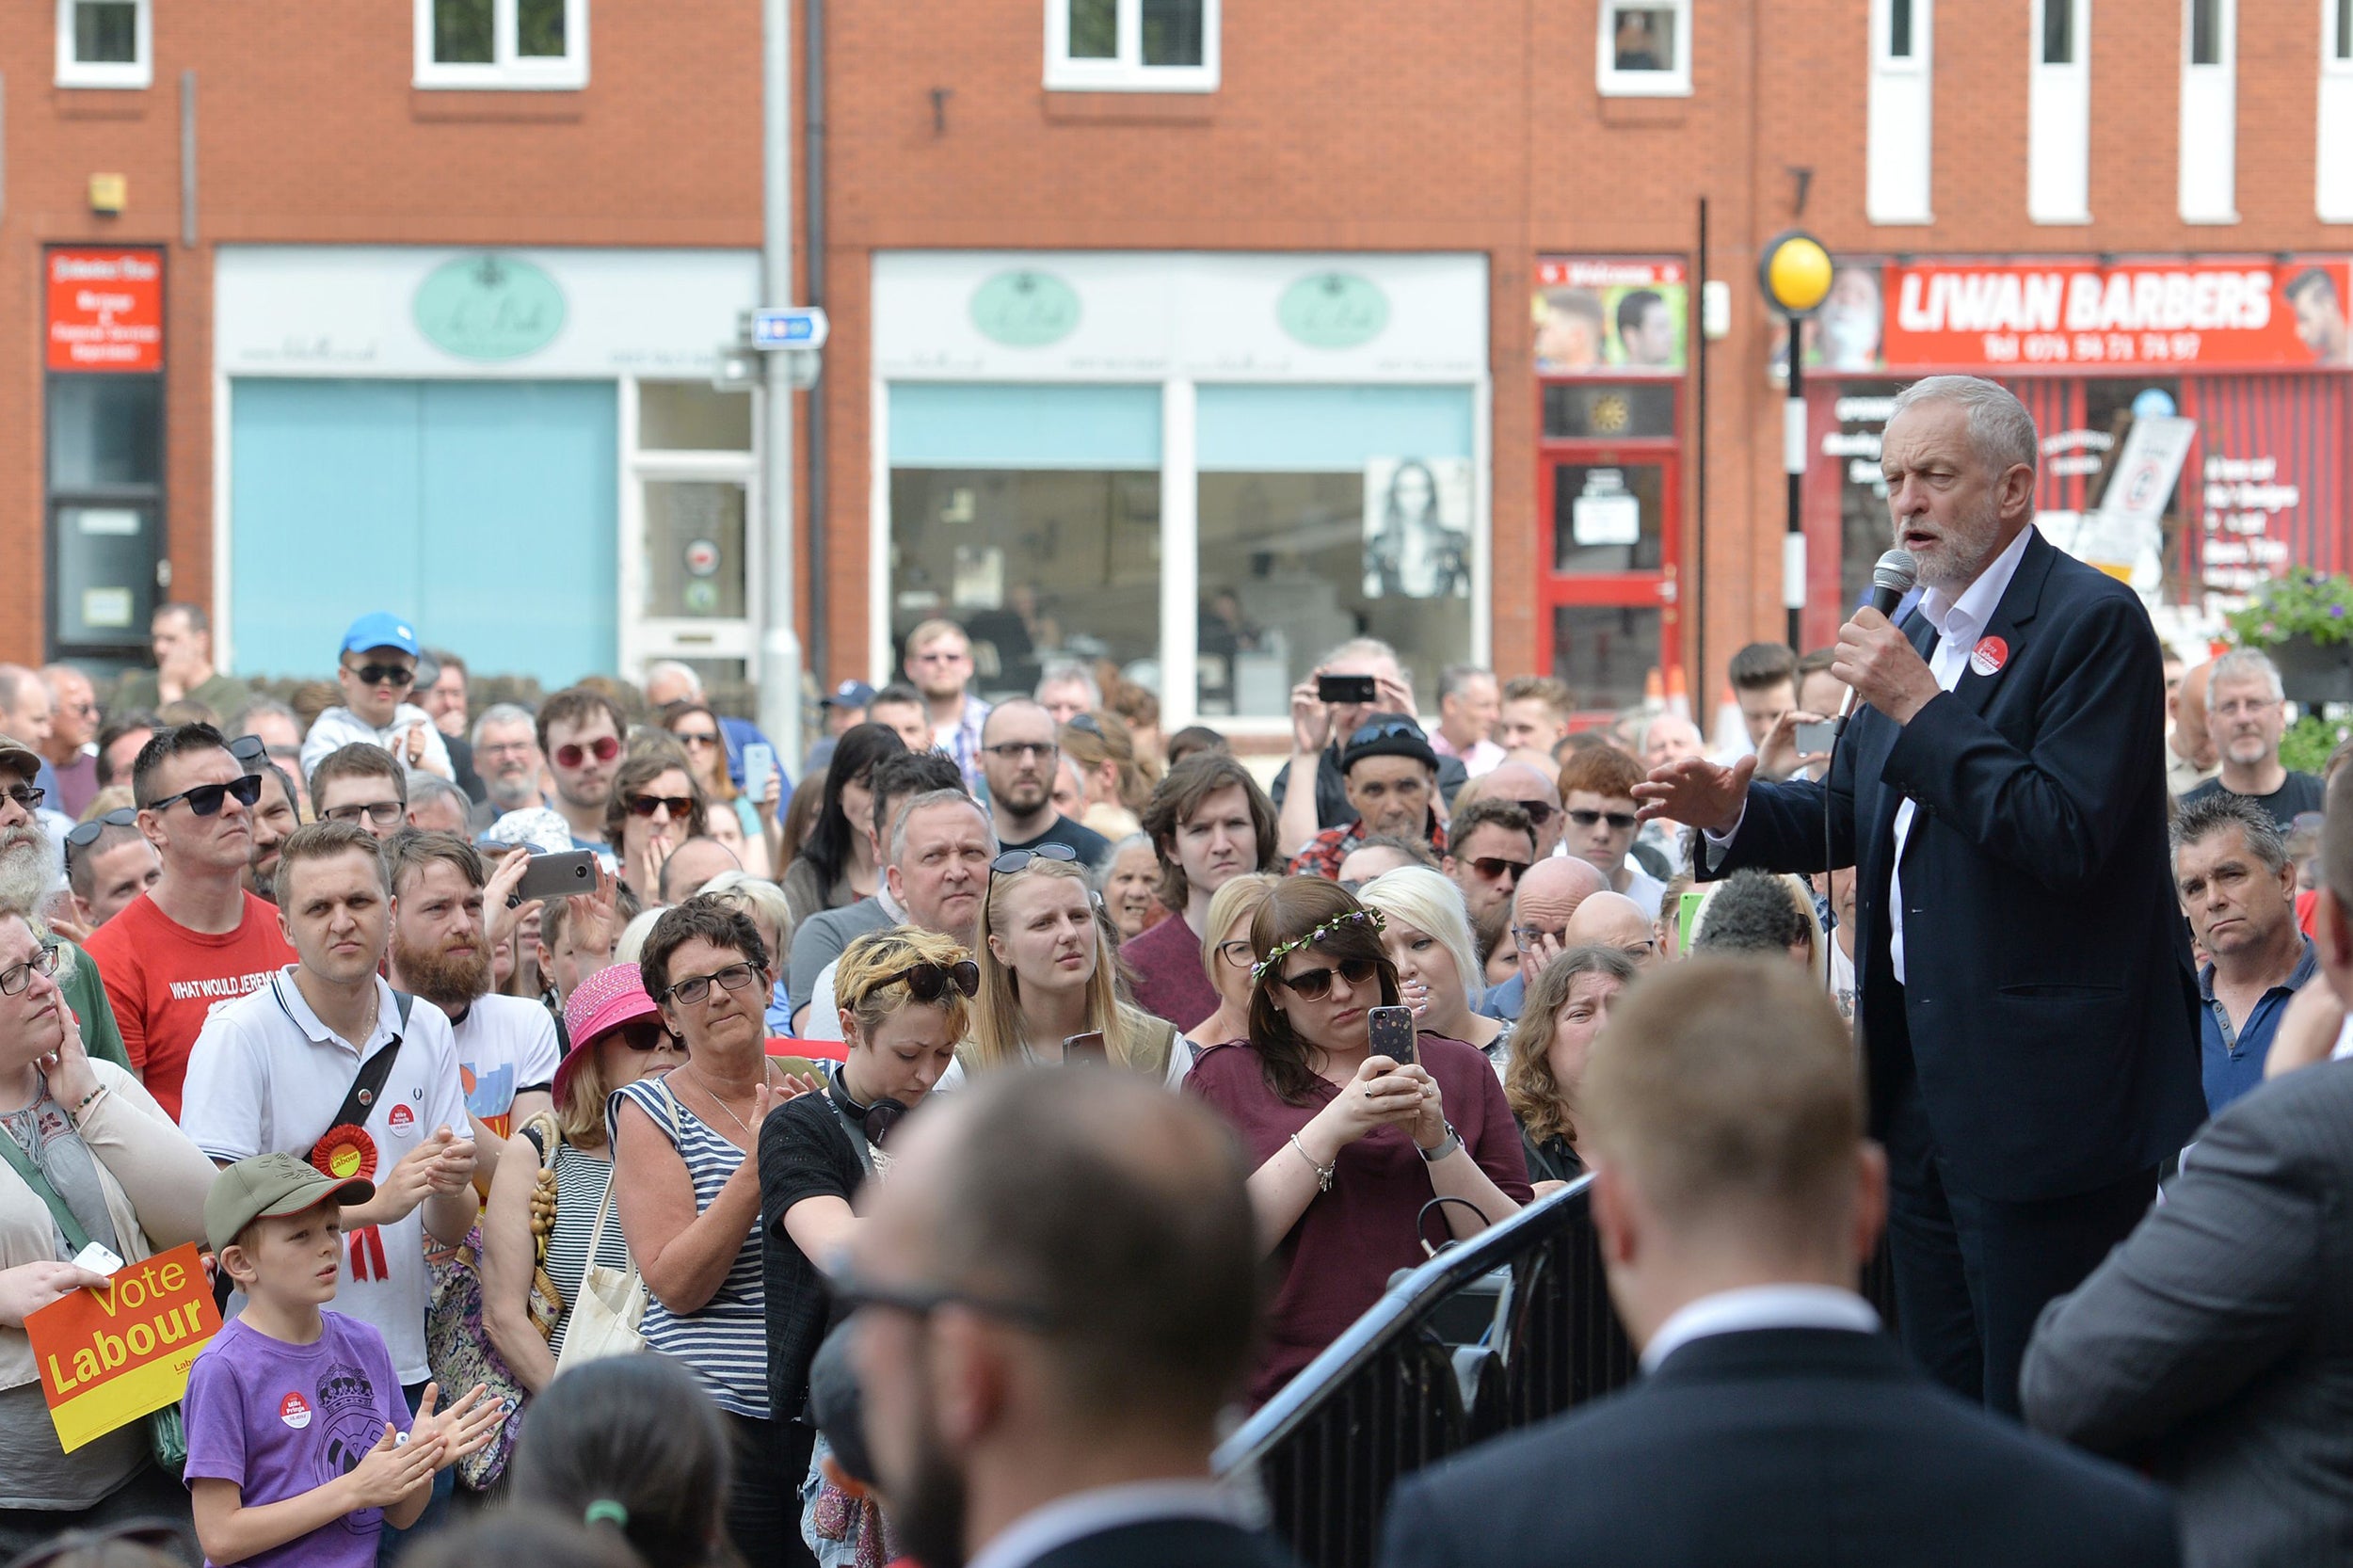 ‘The dementia tax is itself unfair but what’s made matters even worse is the way Theresa May announced a cap and then failed to say how much it would be,’ Mr Corbyn told supporters at a rally in in Hucknall Market Place, East Midlands